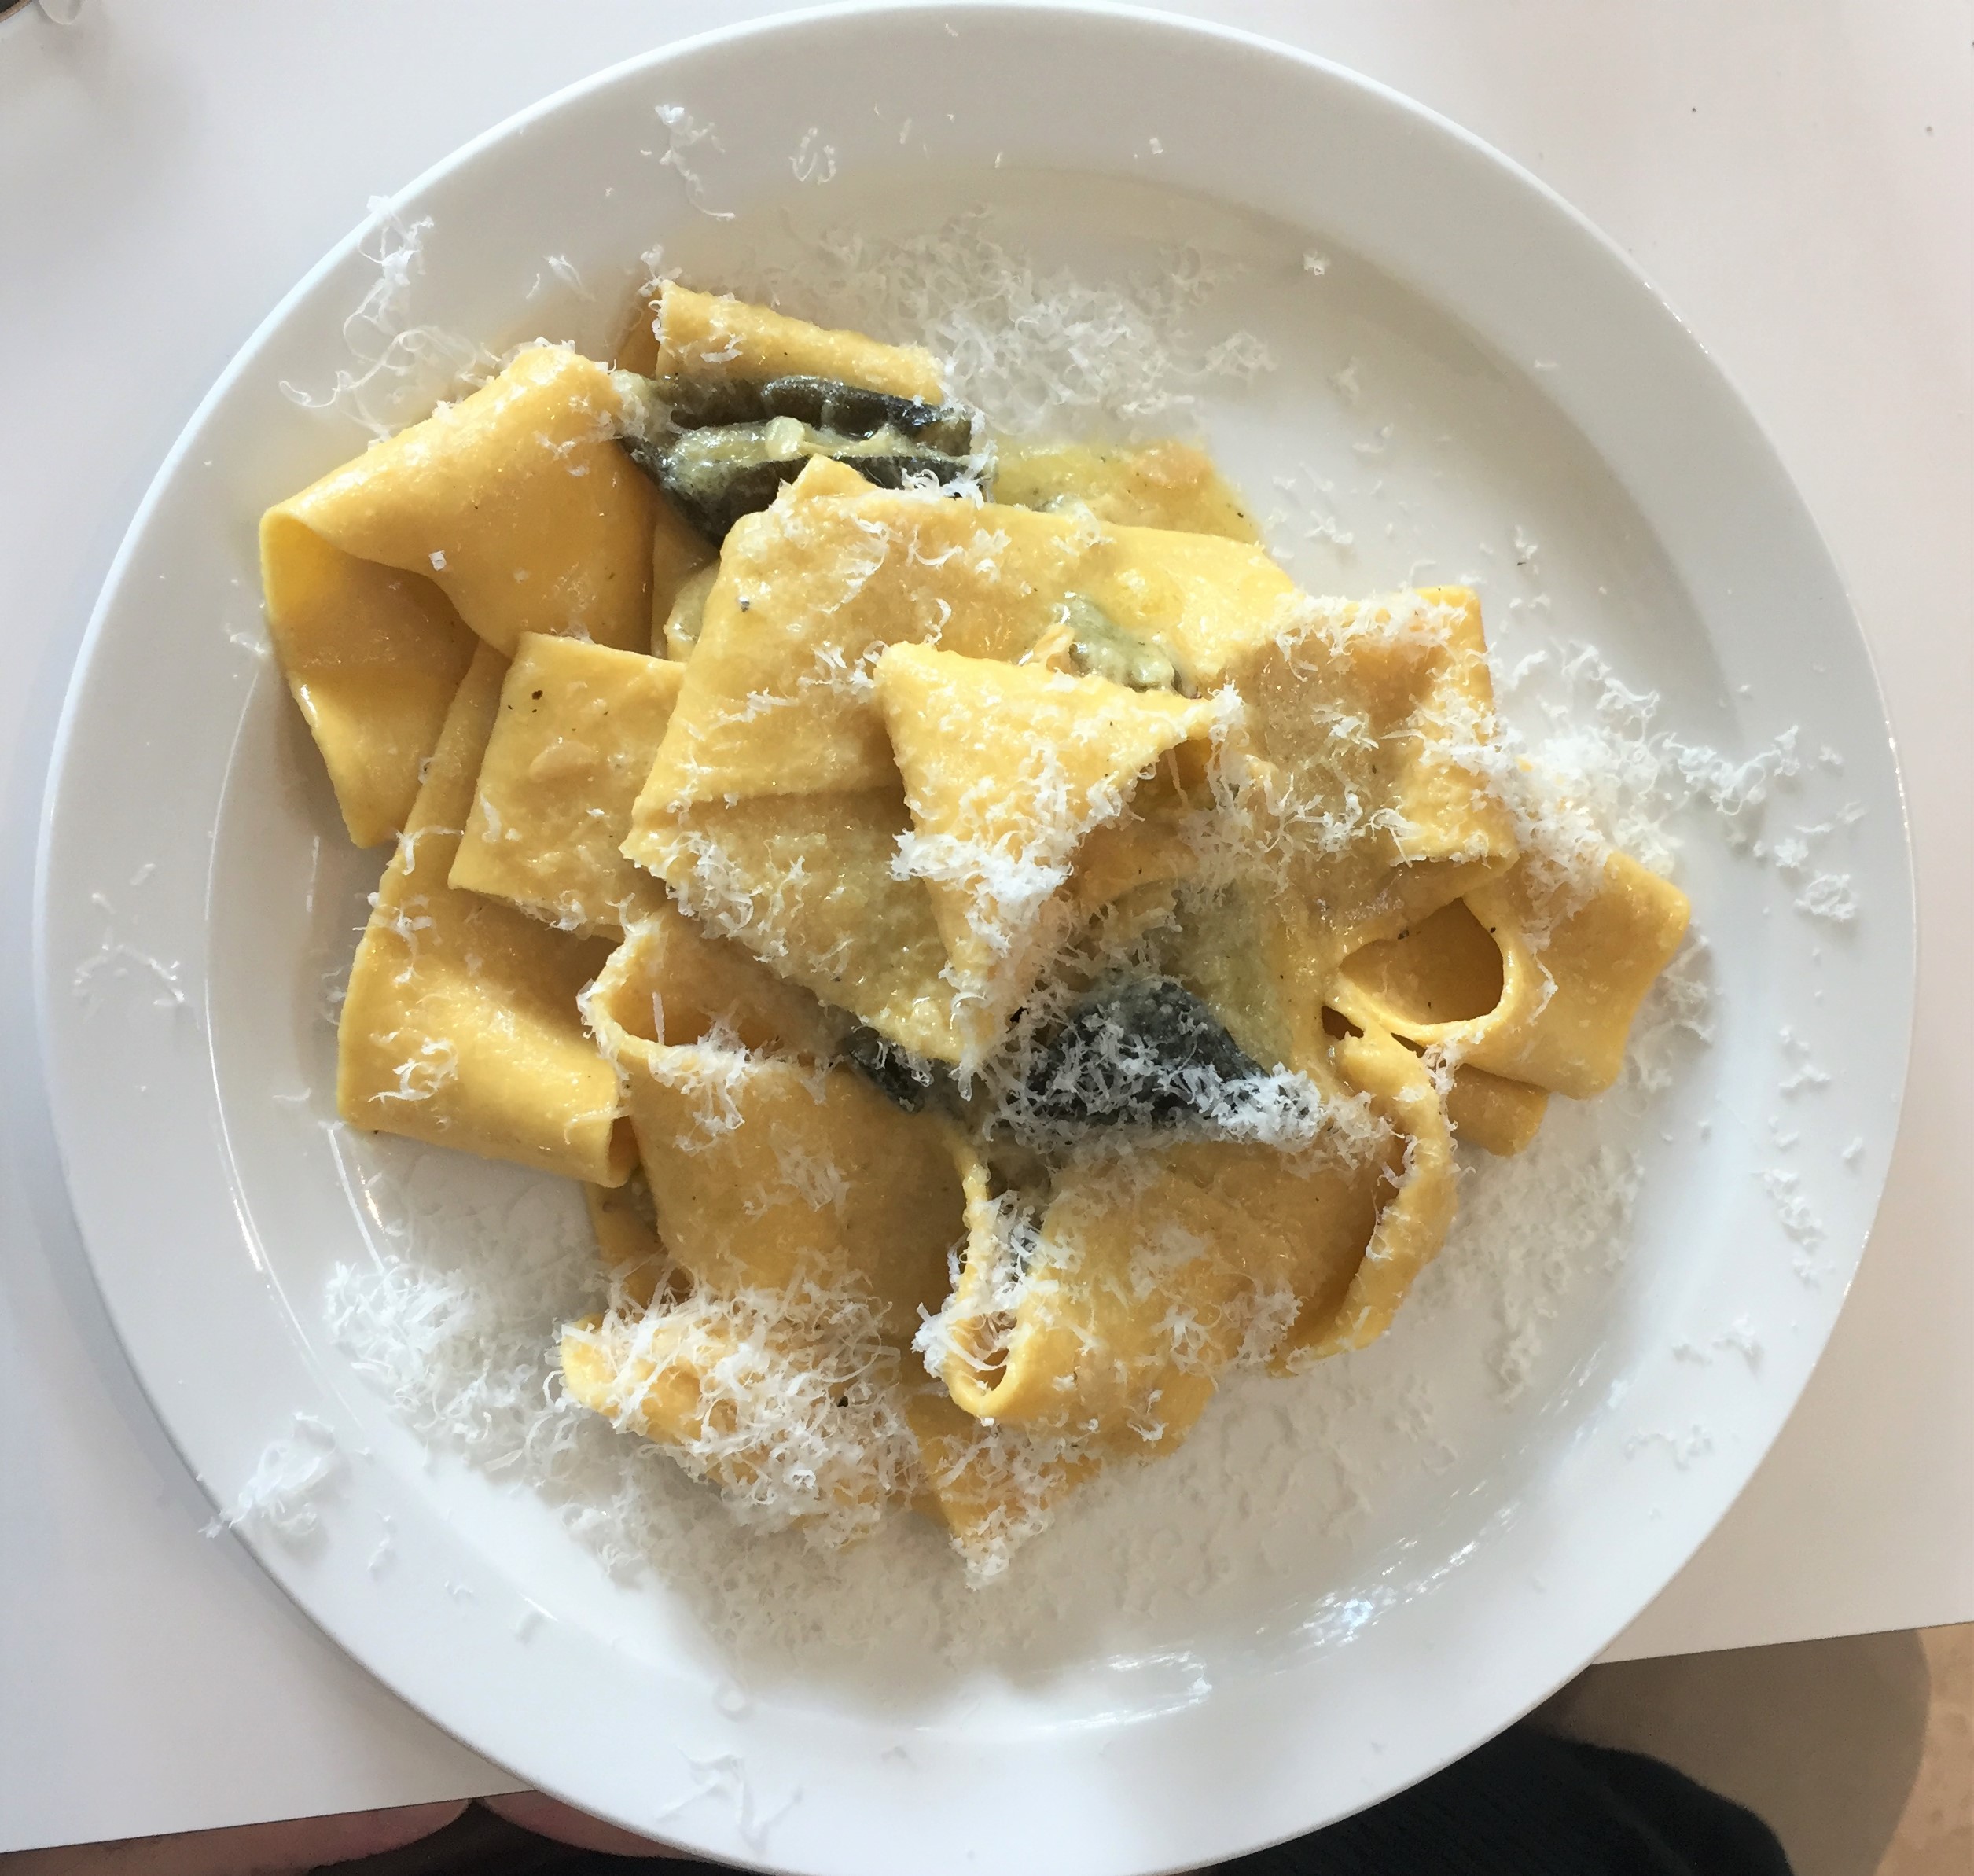 Pappardelle, courgettes and parmesan at The Garden Cafe Museum - kenningtonrunoff.com